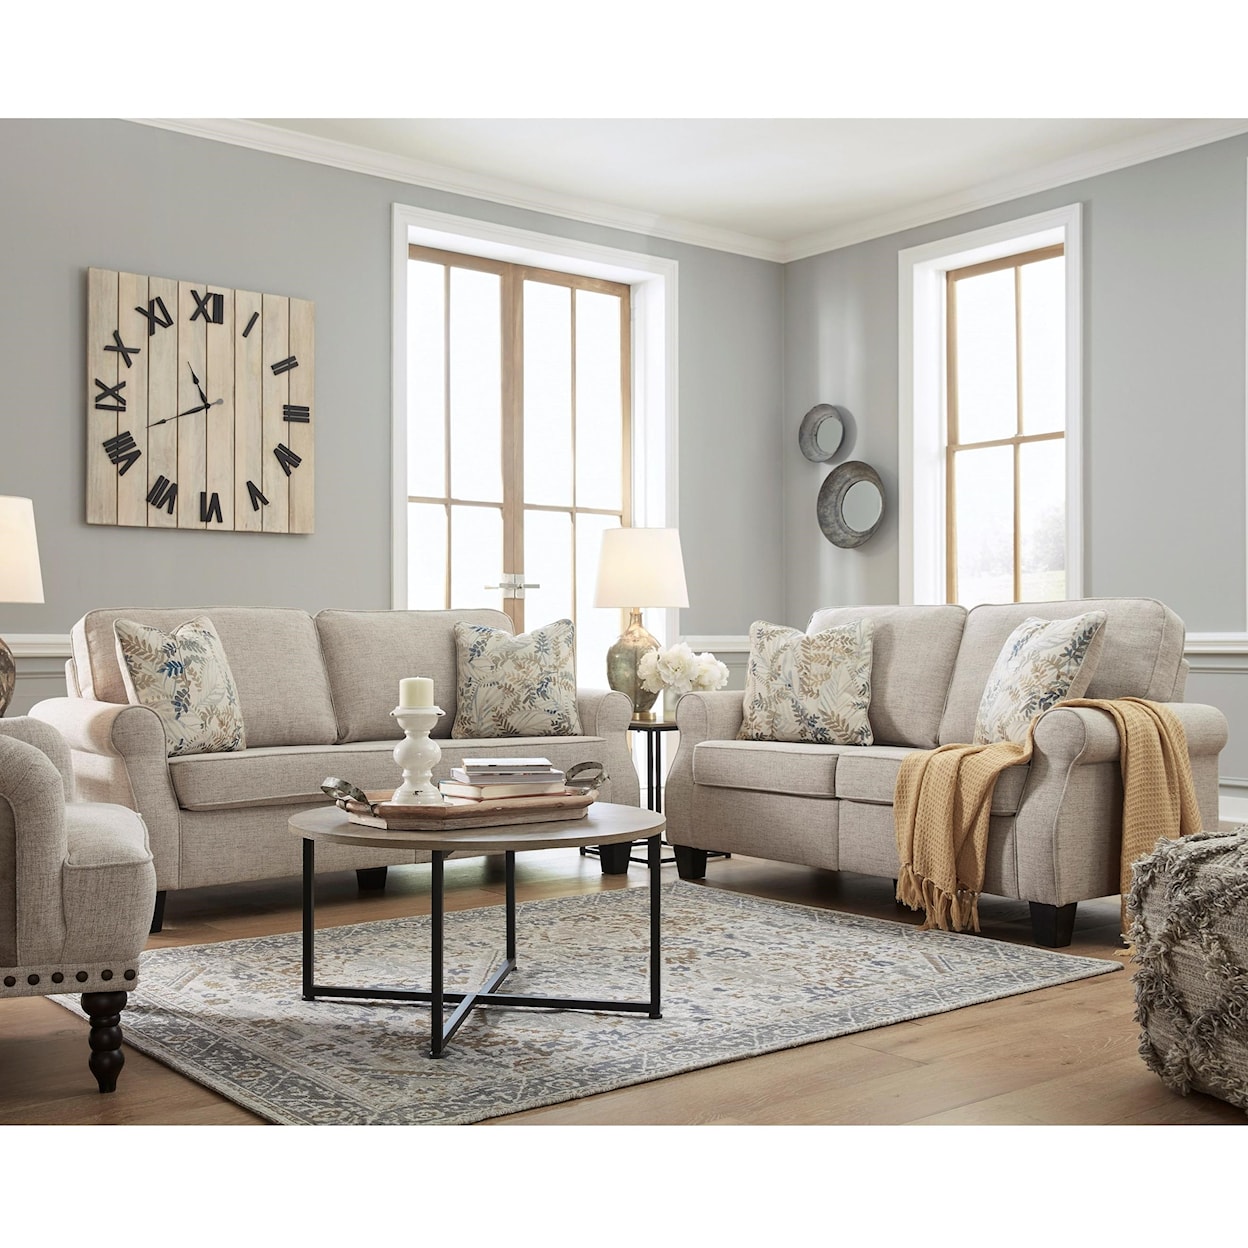 Michael Alan Select Alessio Living Room Group